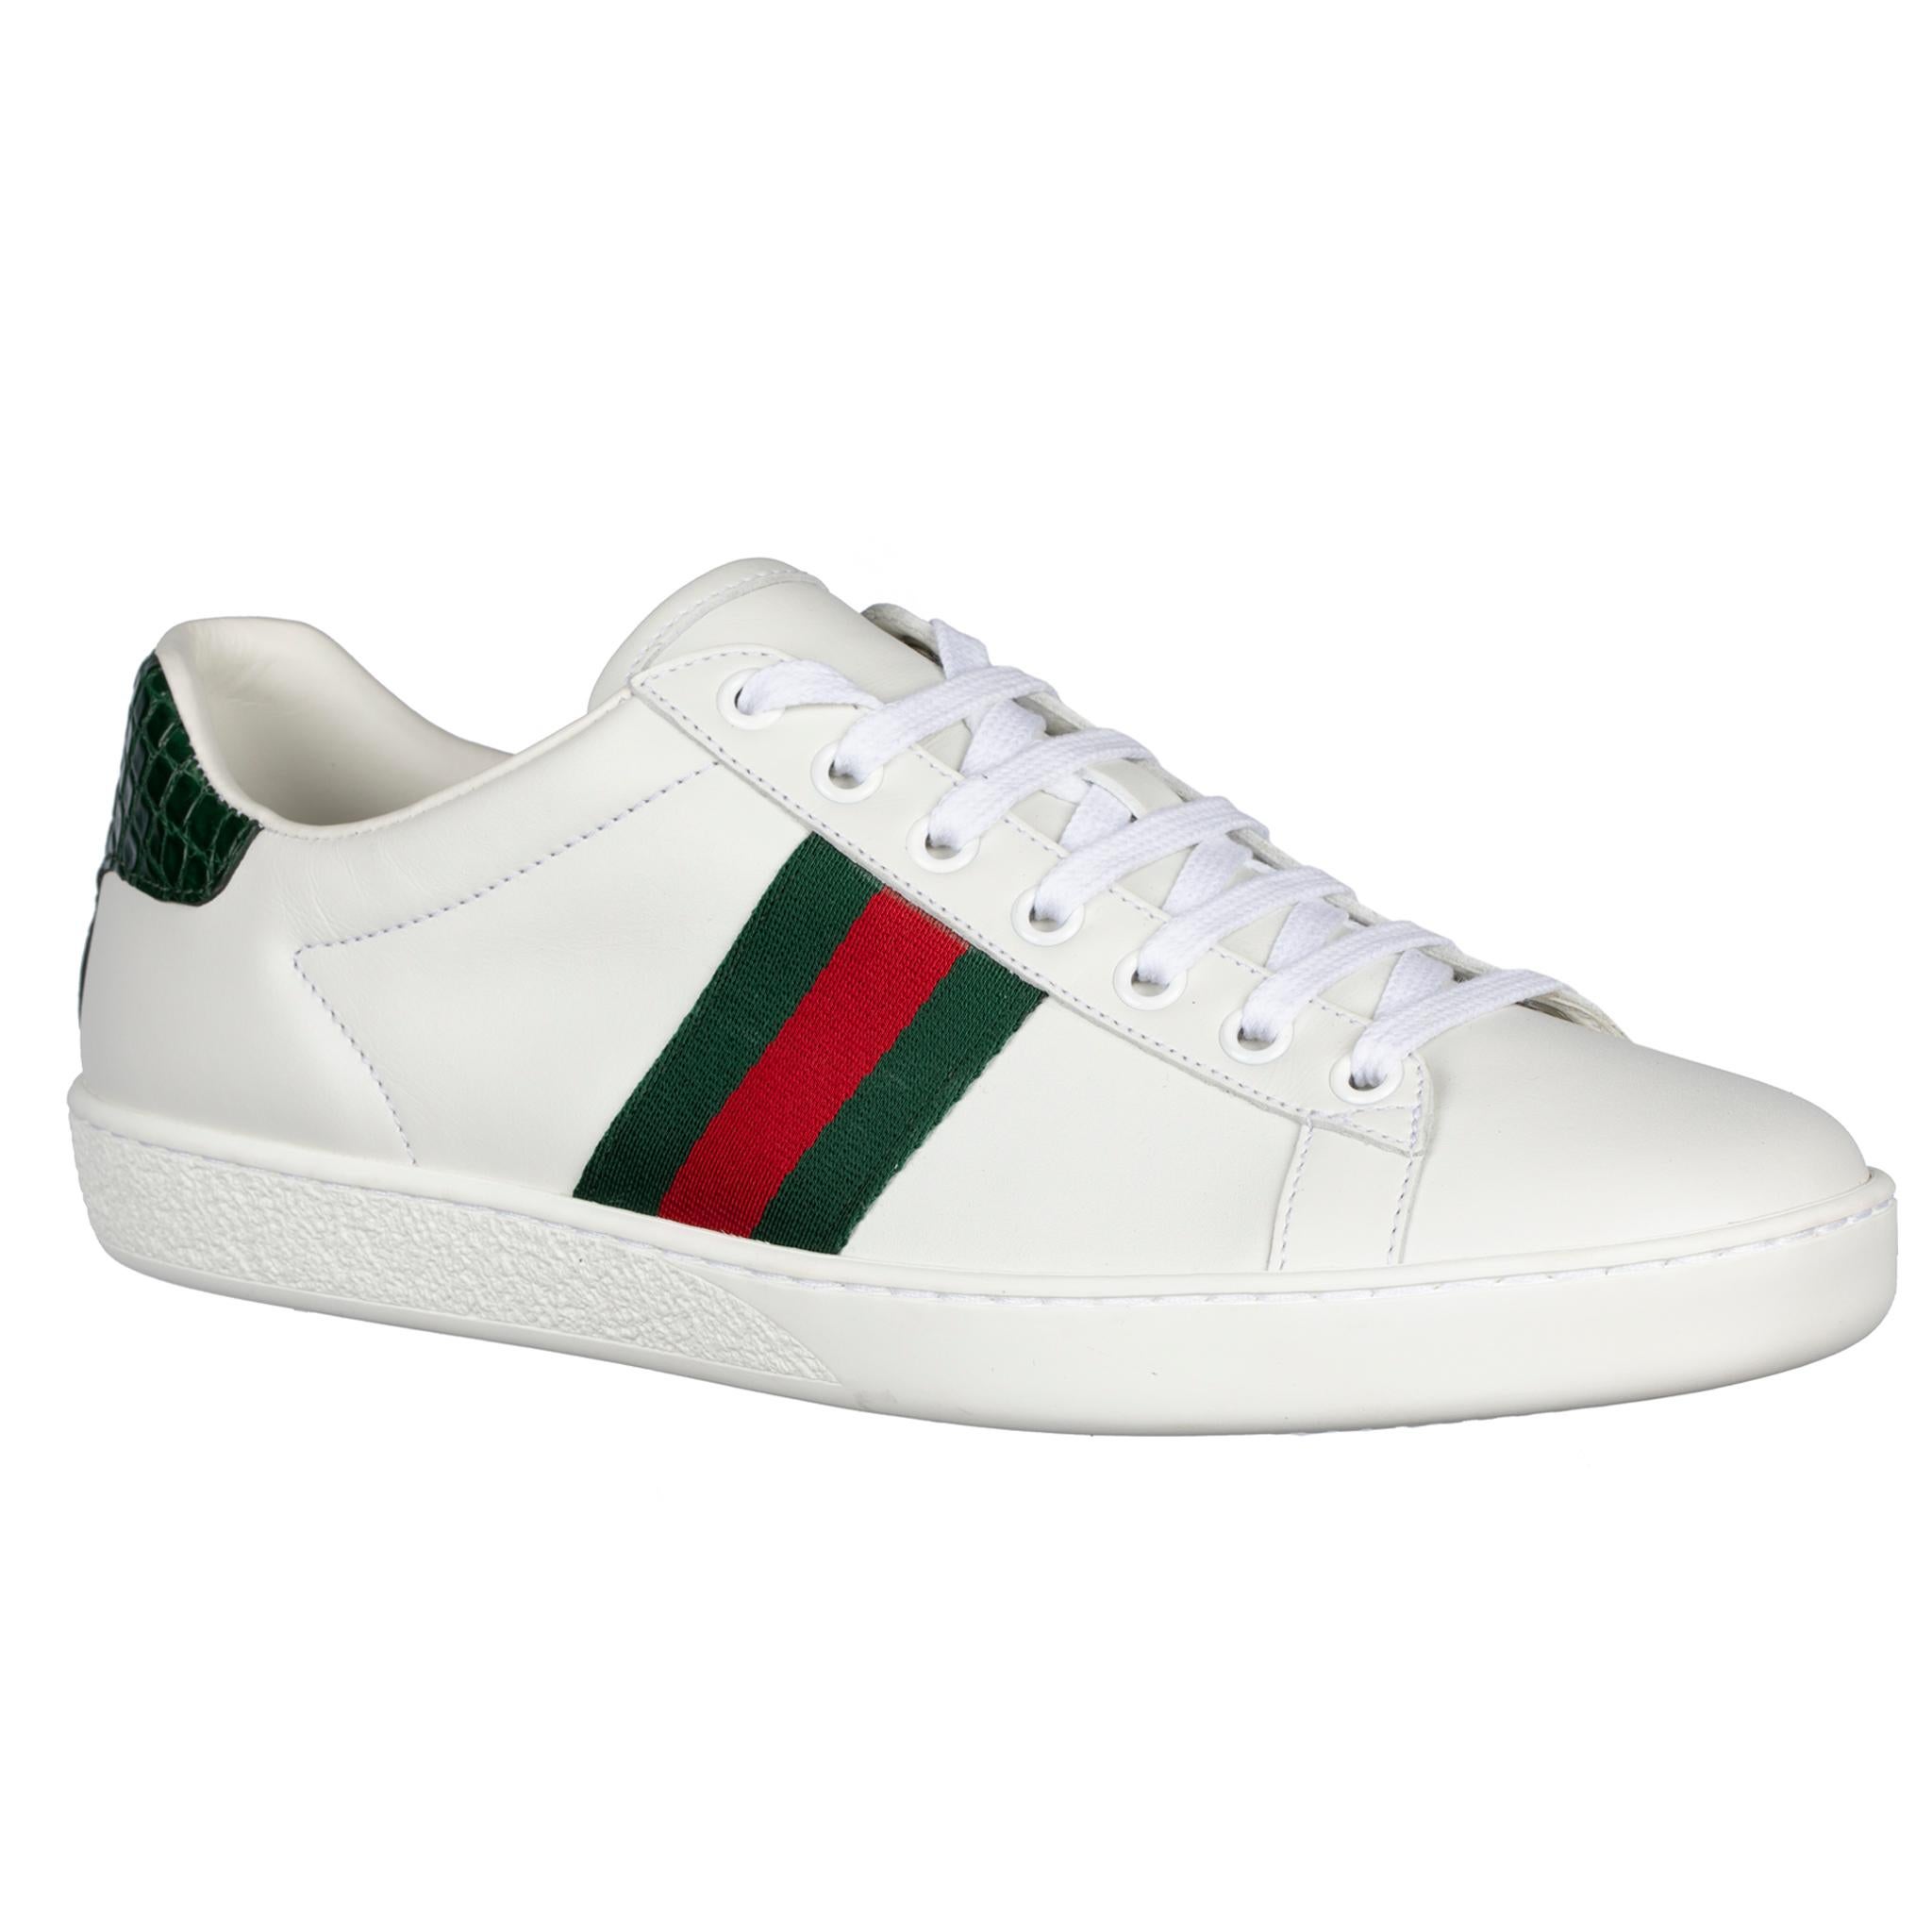 gucci sneakers red and green